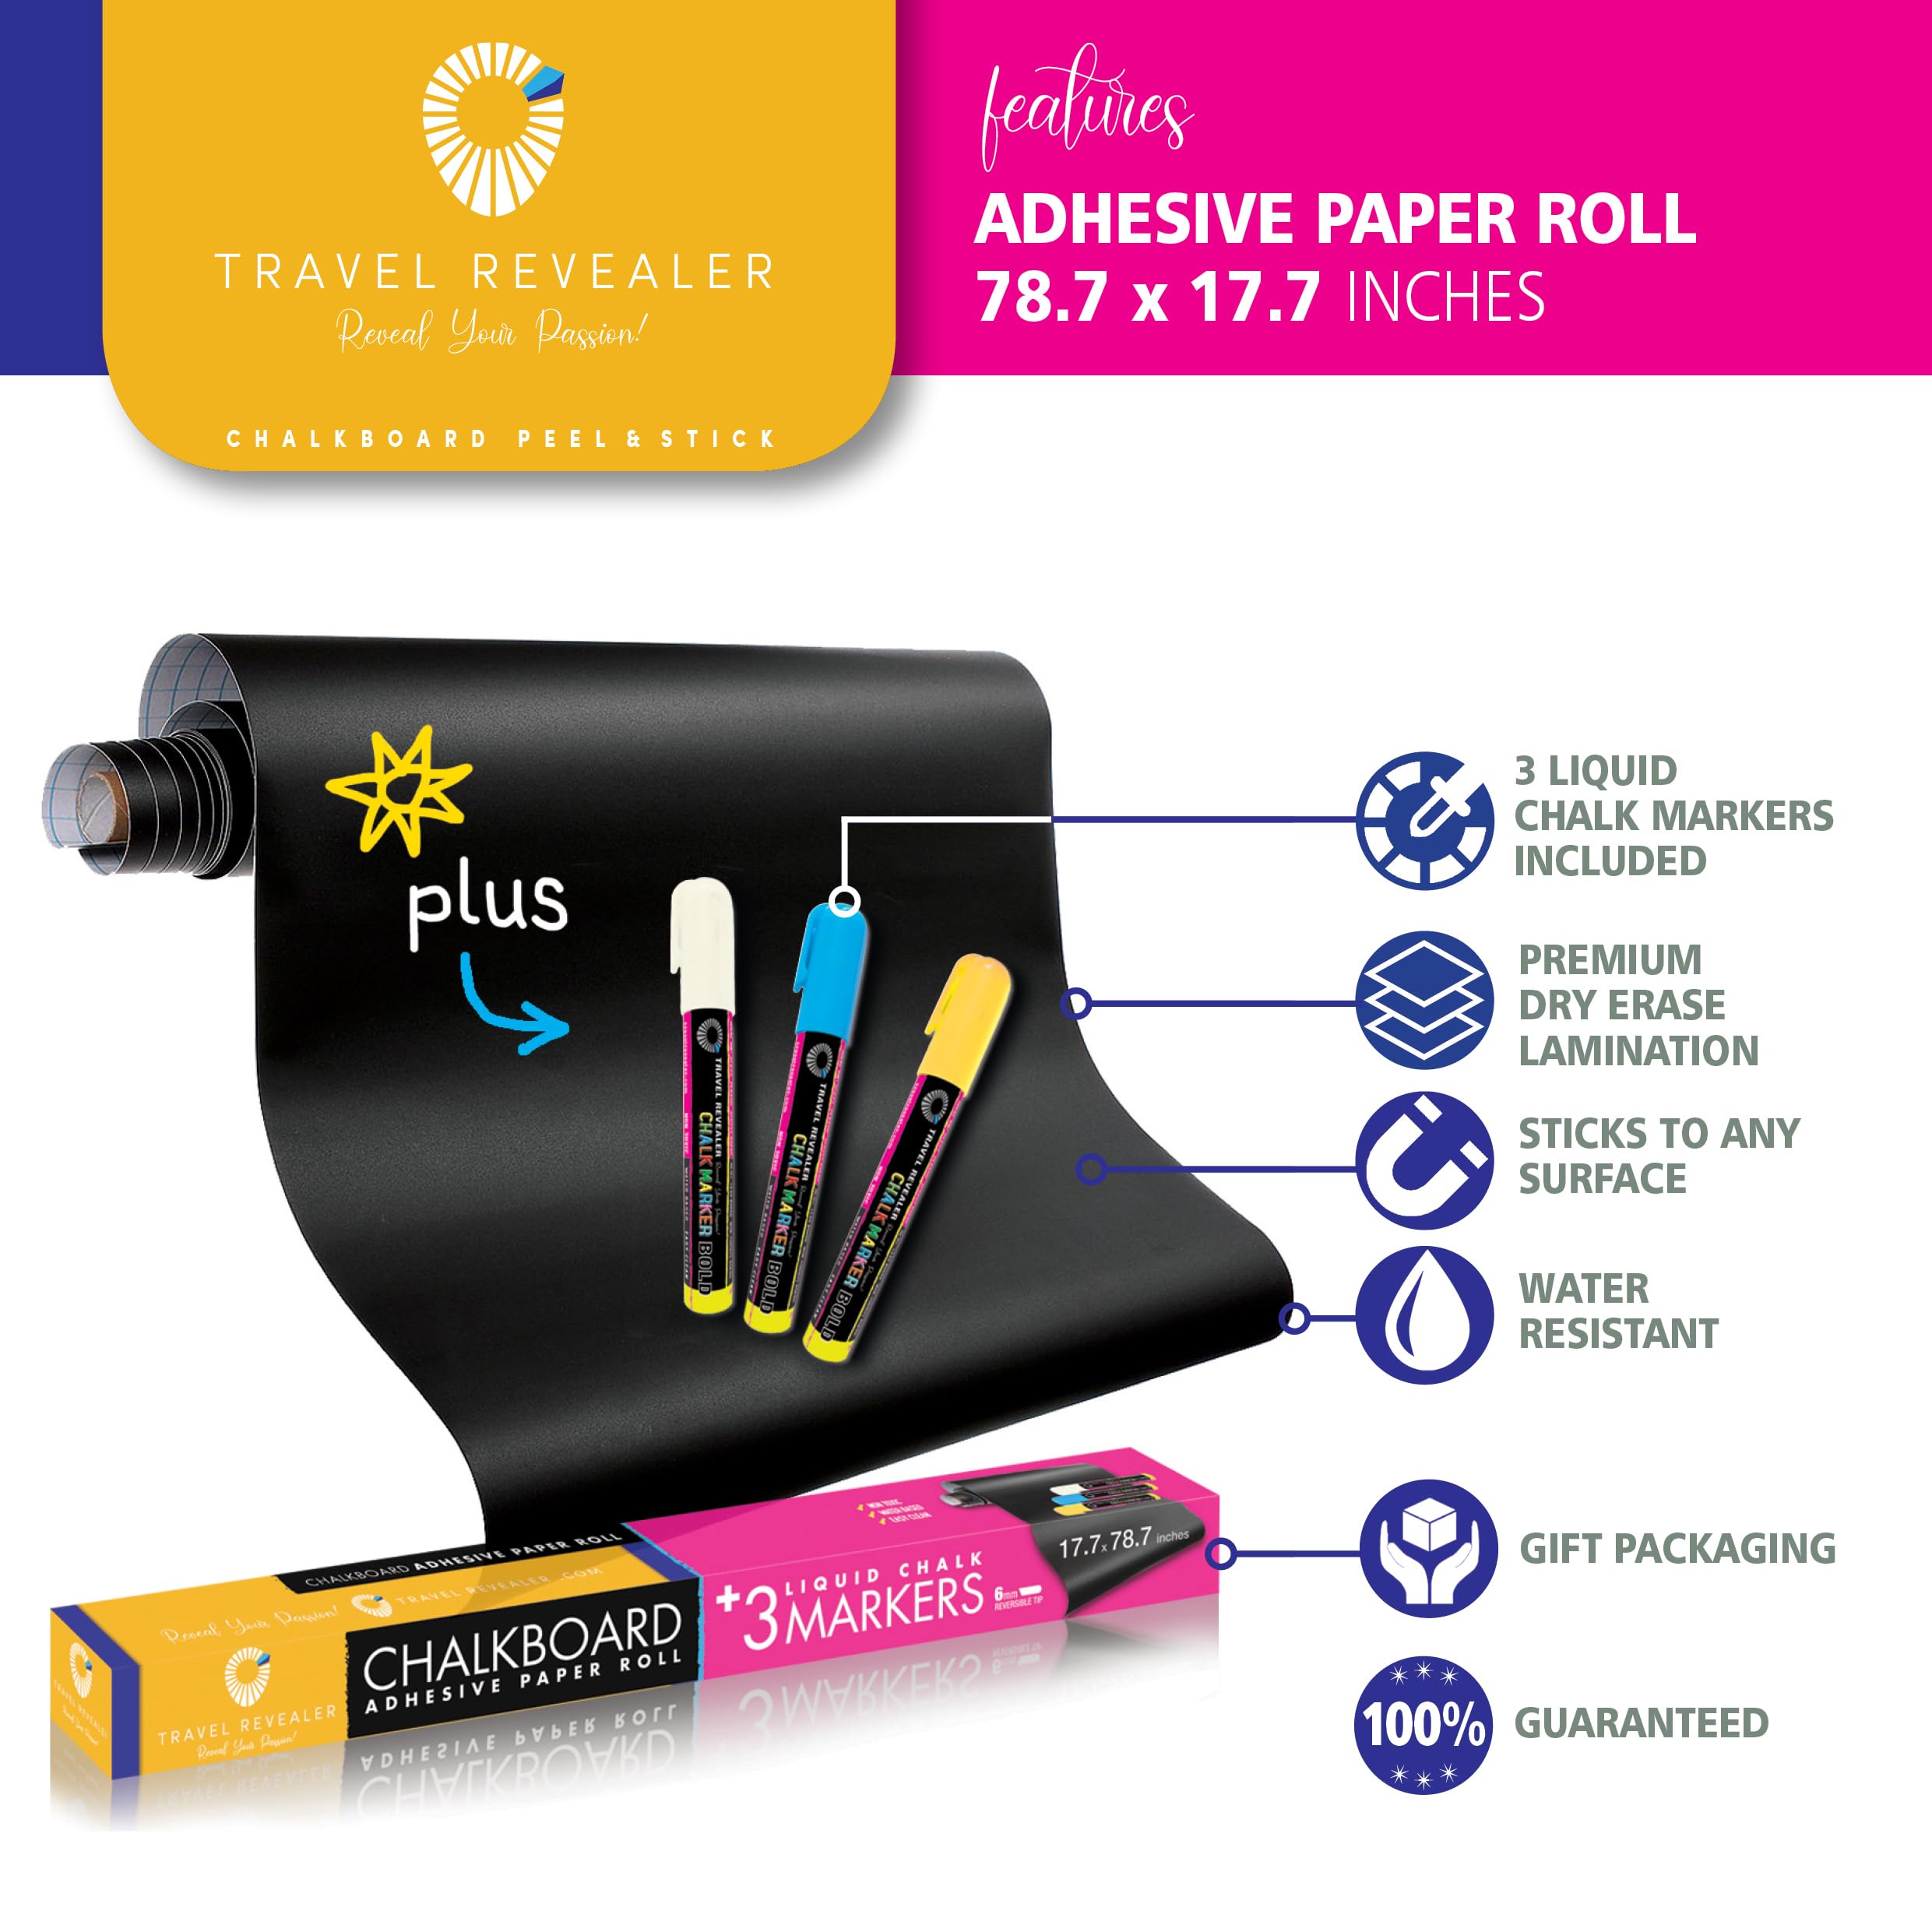 Travel Revealer Chalkboard Contact Paper Self Adhesive Dry Erase Contact Paper Roll +3 Liquid Chalk Markers 17.7x78.7 Wallpaper Stick & Peel Removable Contact Paper Blackboard Vinyl Black Stickers